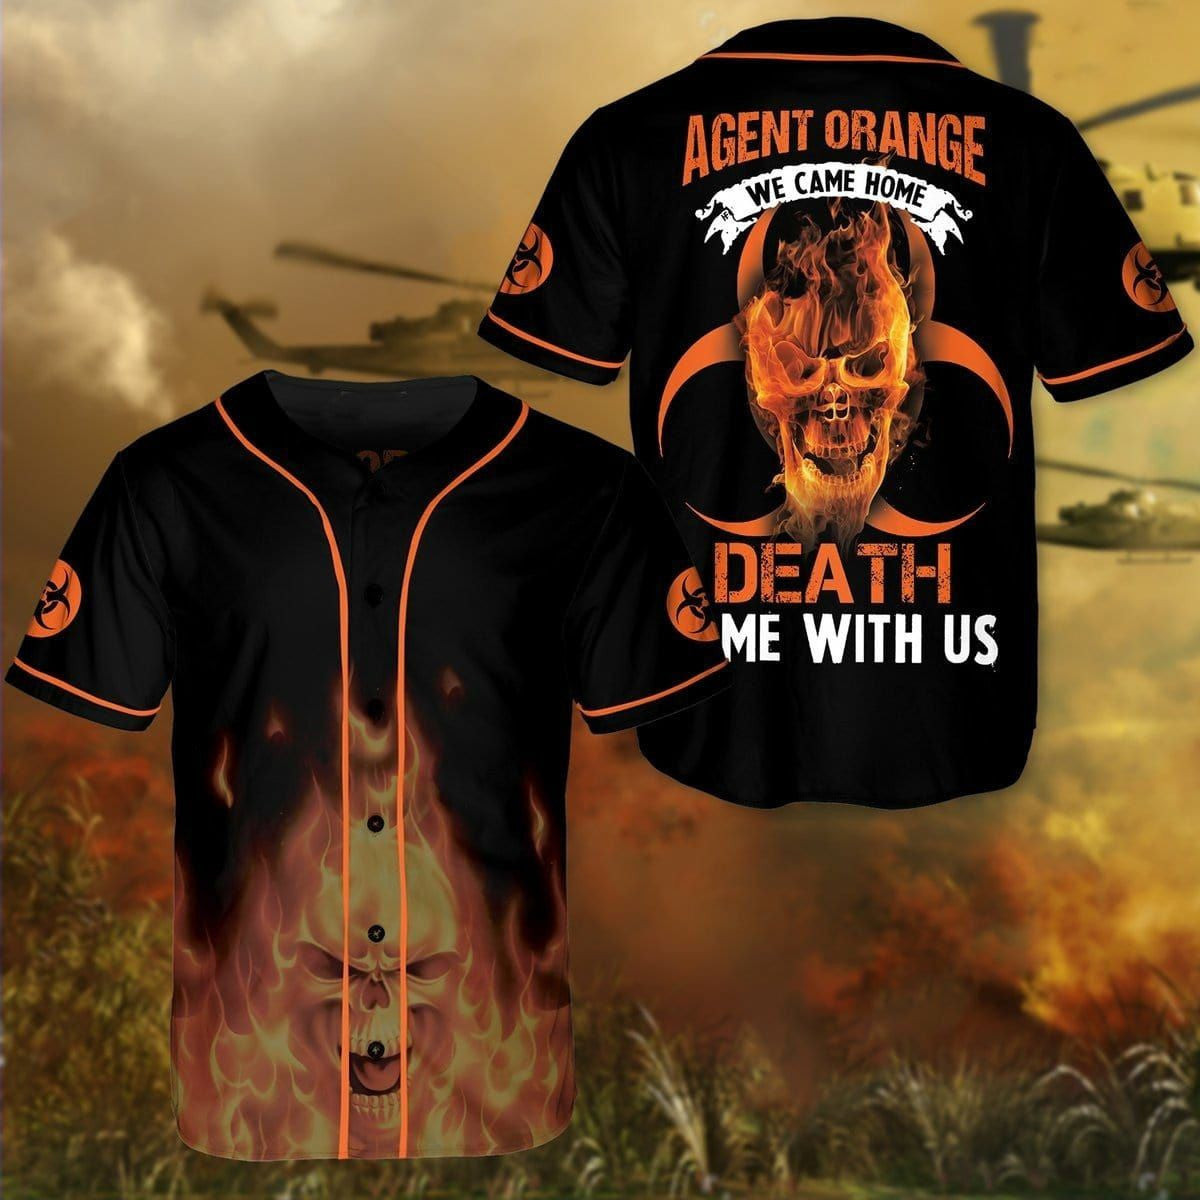 Veteran Agent Orange We Came Home Death Came With Us Baseball Jersey, Unisex Jersey Shirt for Men Women